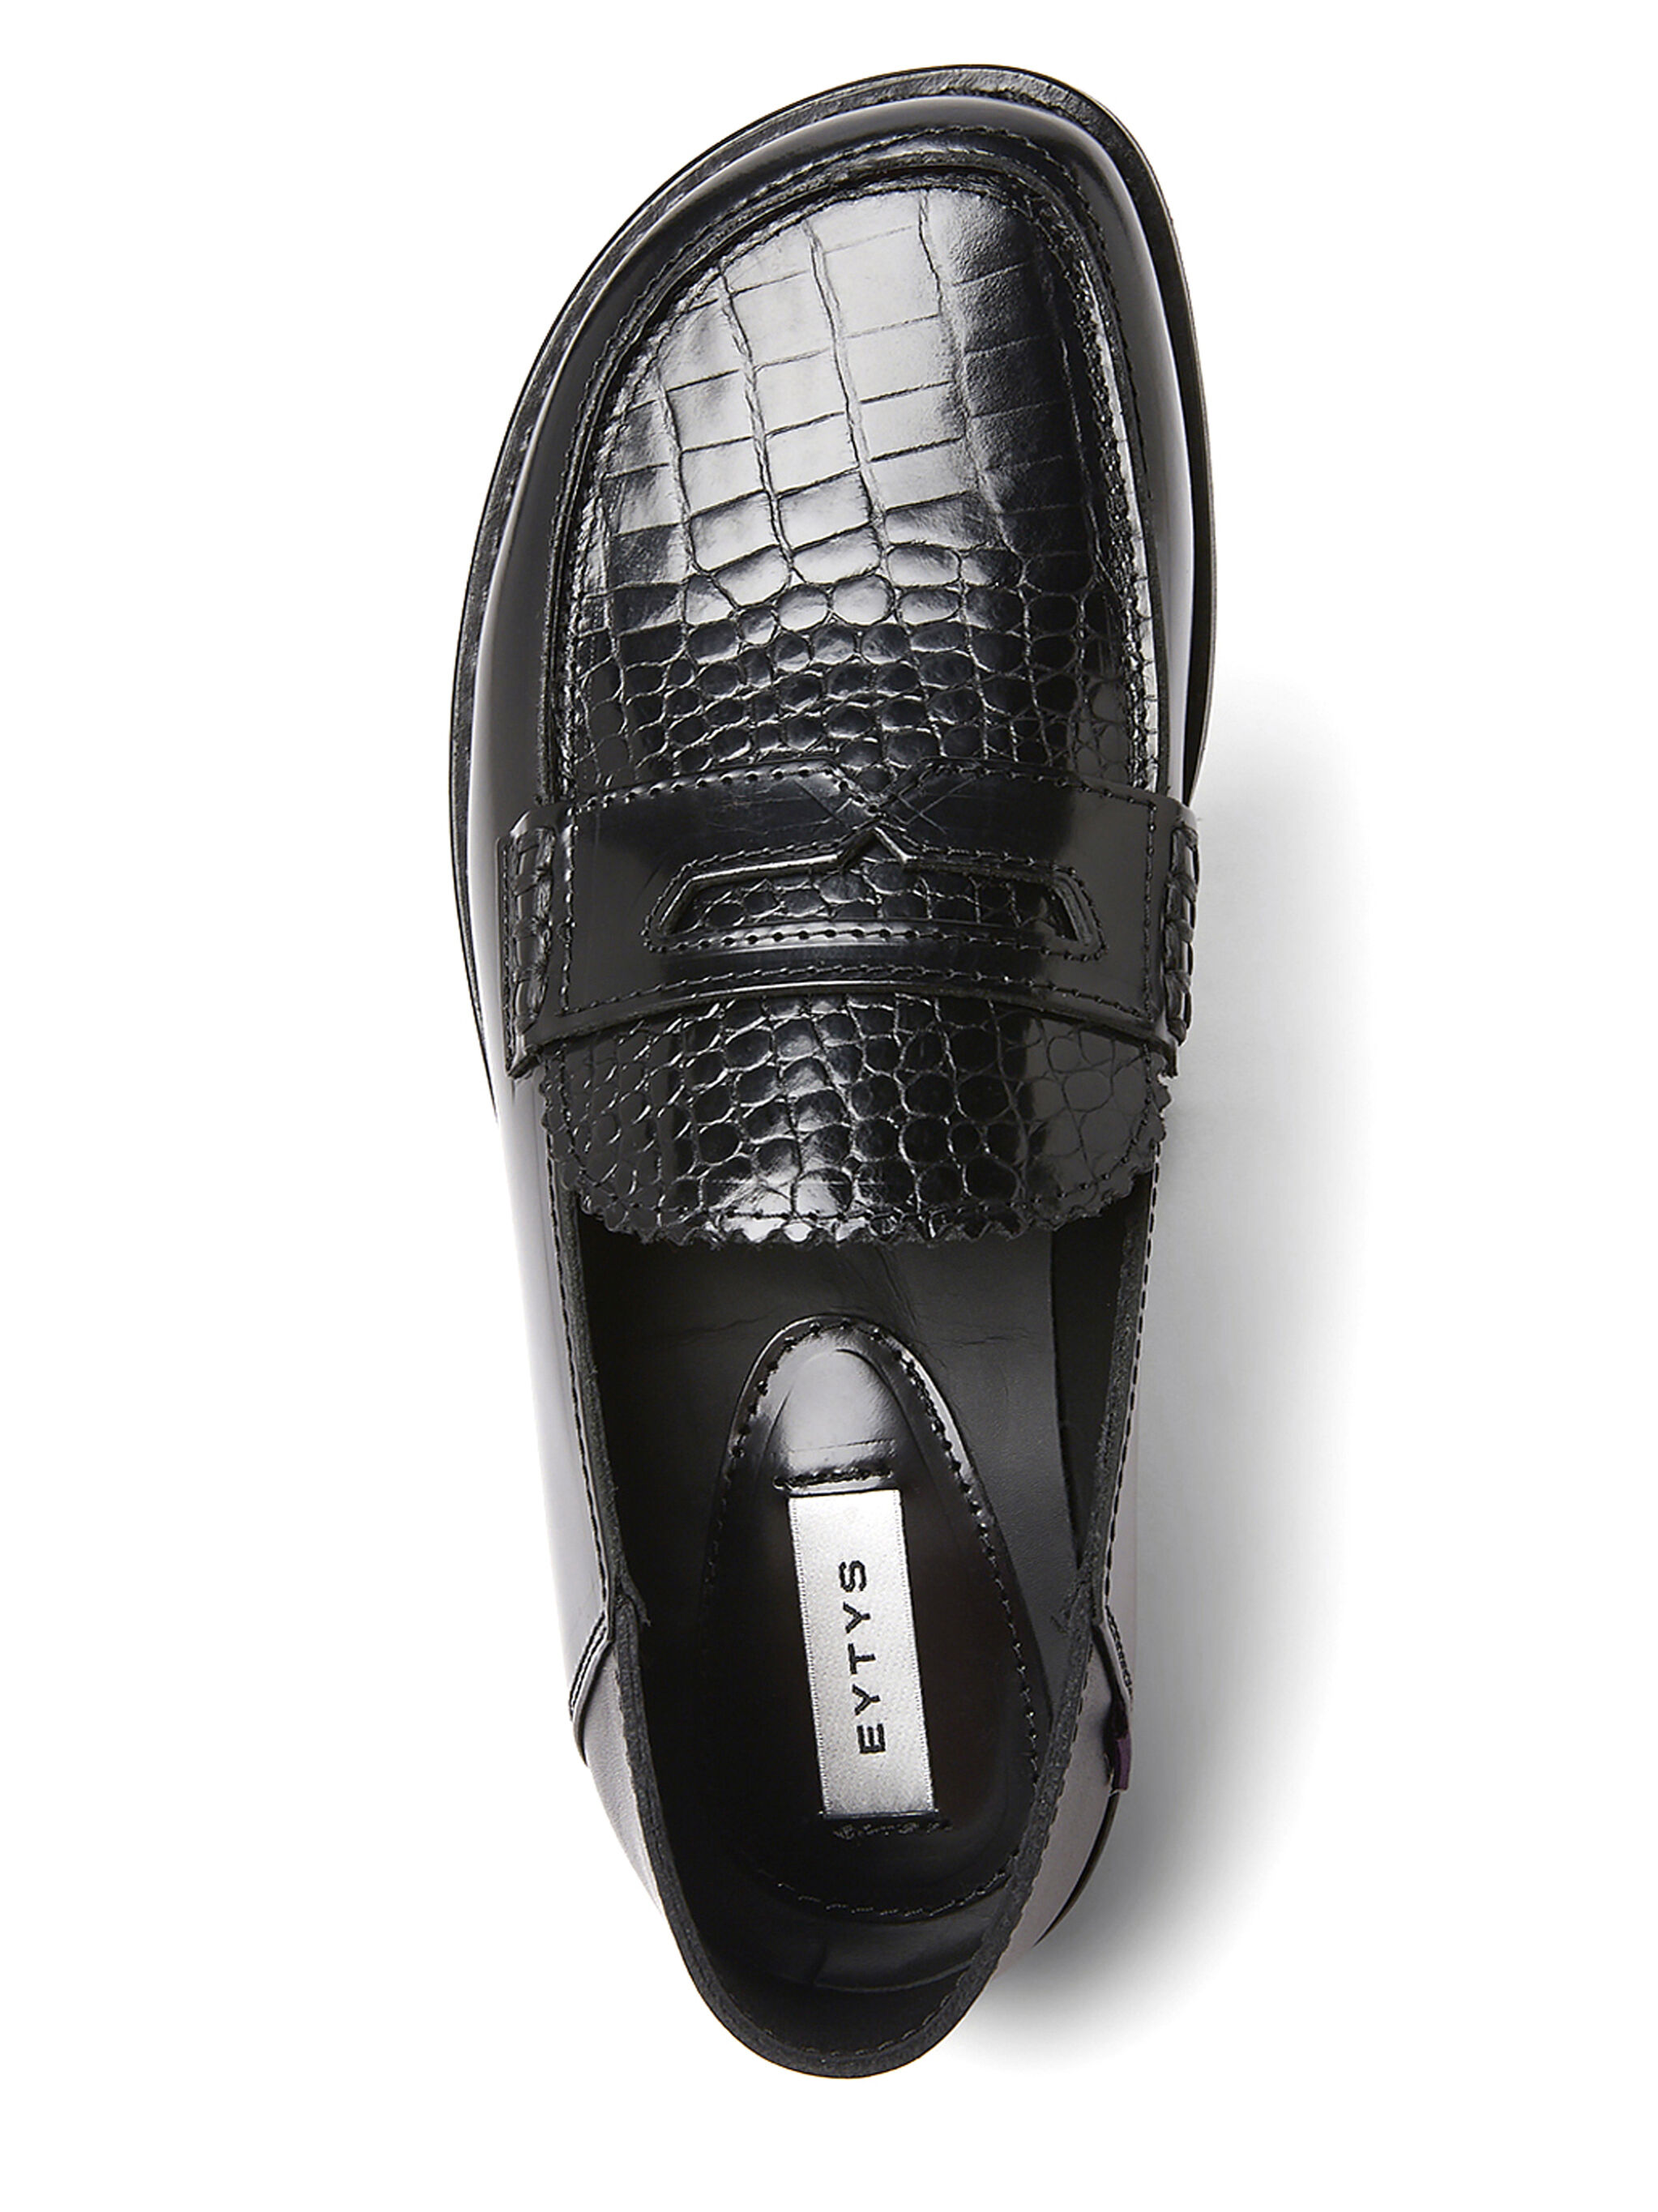 Eytys Otello Loafers | THE FLAMEL®